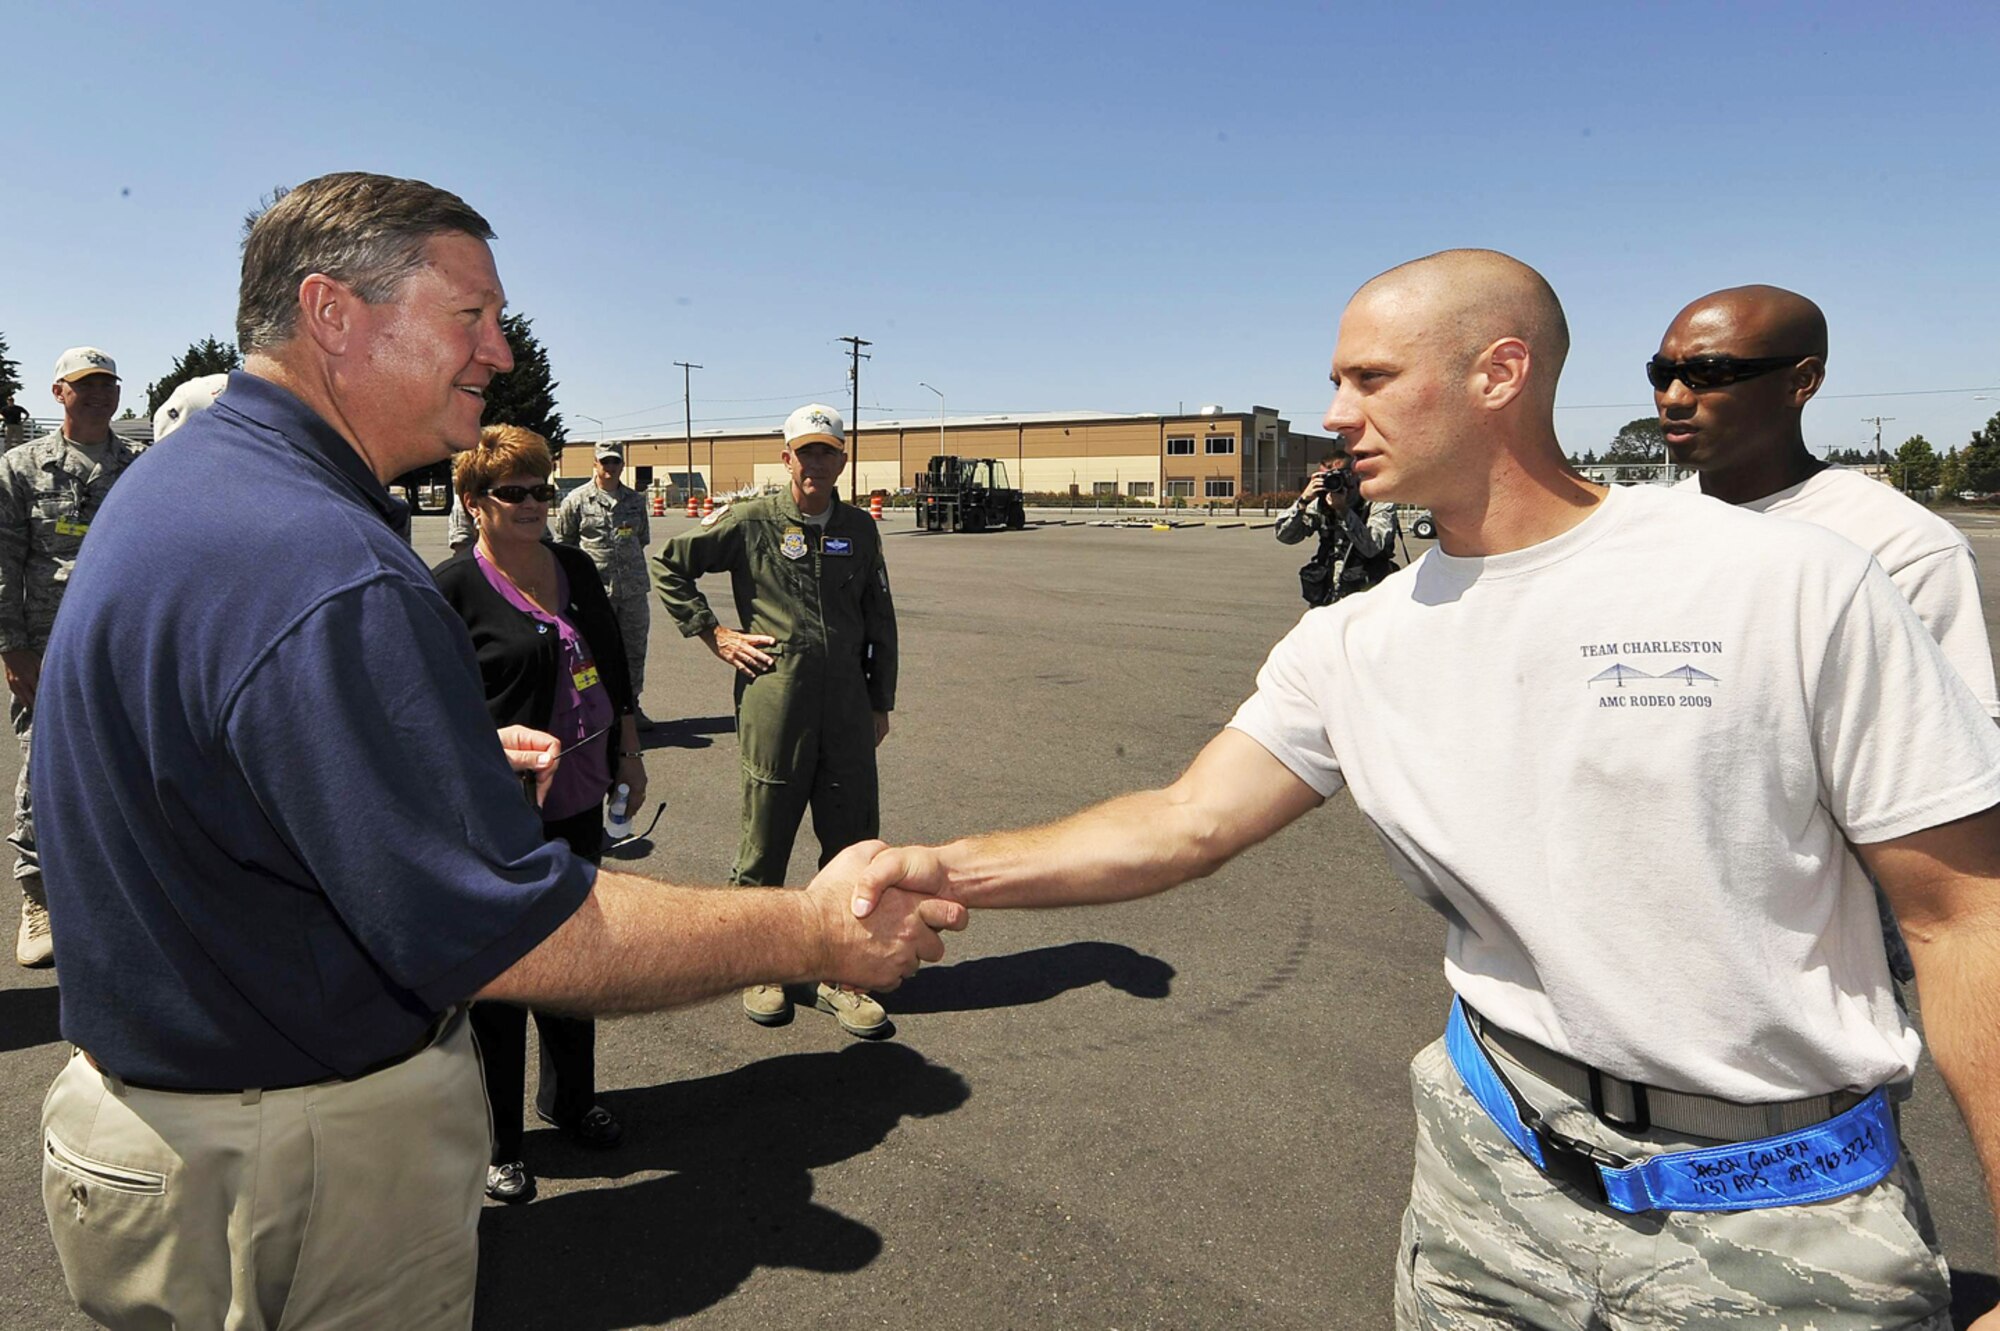 Senior Airman Jason Golden shakes hands with Secretary of the Air Force Michael B. Donley July 22 at McChord Air Force Base, Wash. Airman Golden just completed the 10K forklift event during Air Mobility Rodeo 2009. Airman Golden is assigned to the 437th Airlift Wing from Charleston Air Force Base, S.C. (U.S. Air Force photo/James M. Bowman) 
